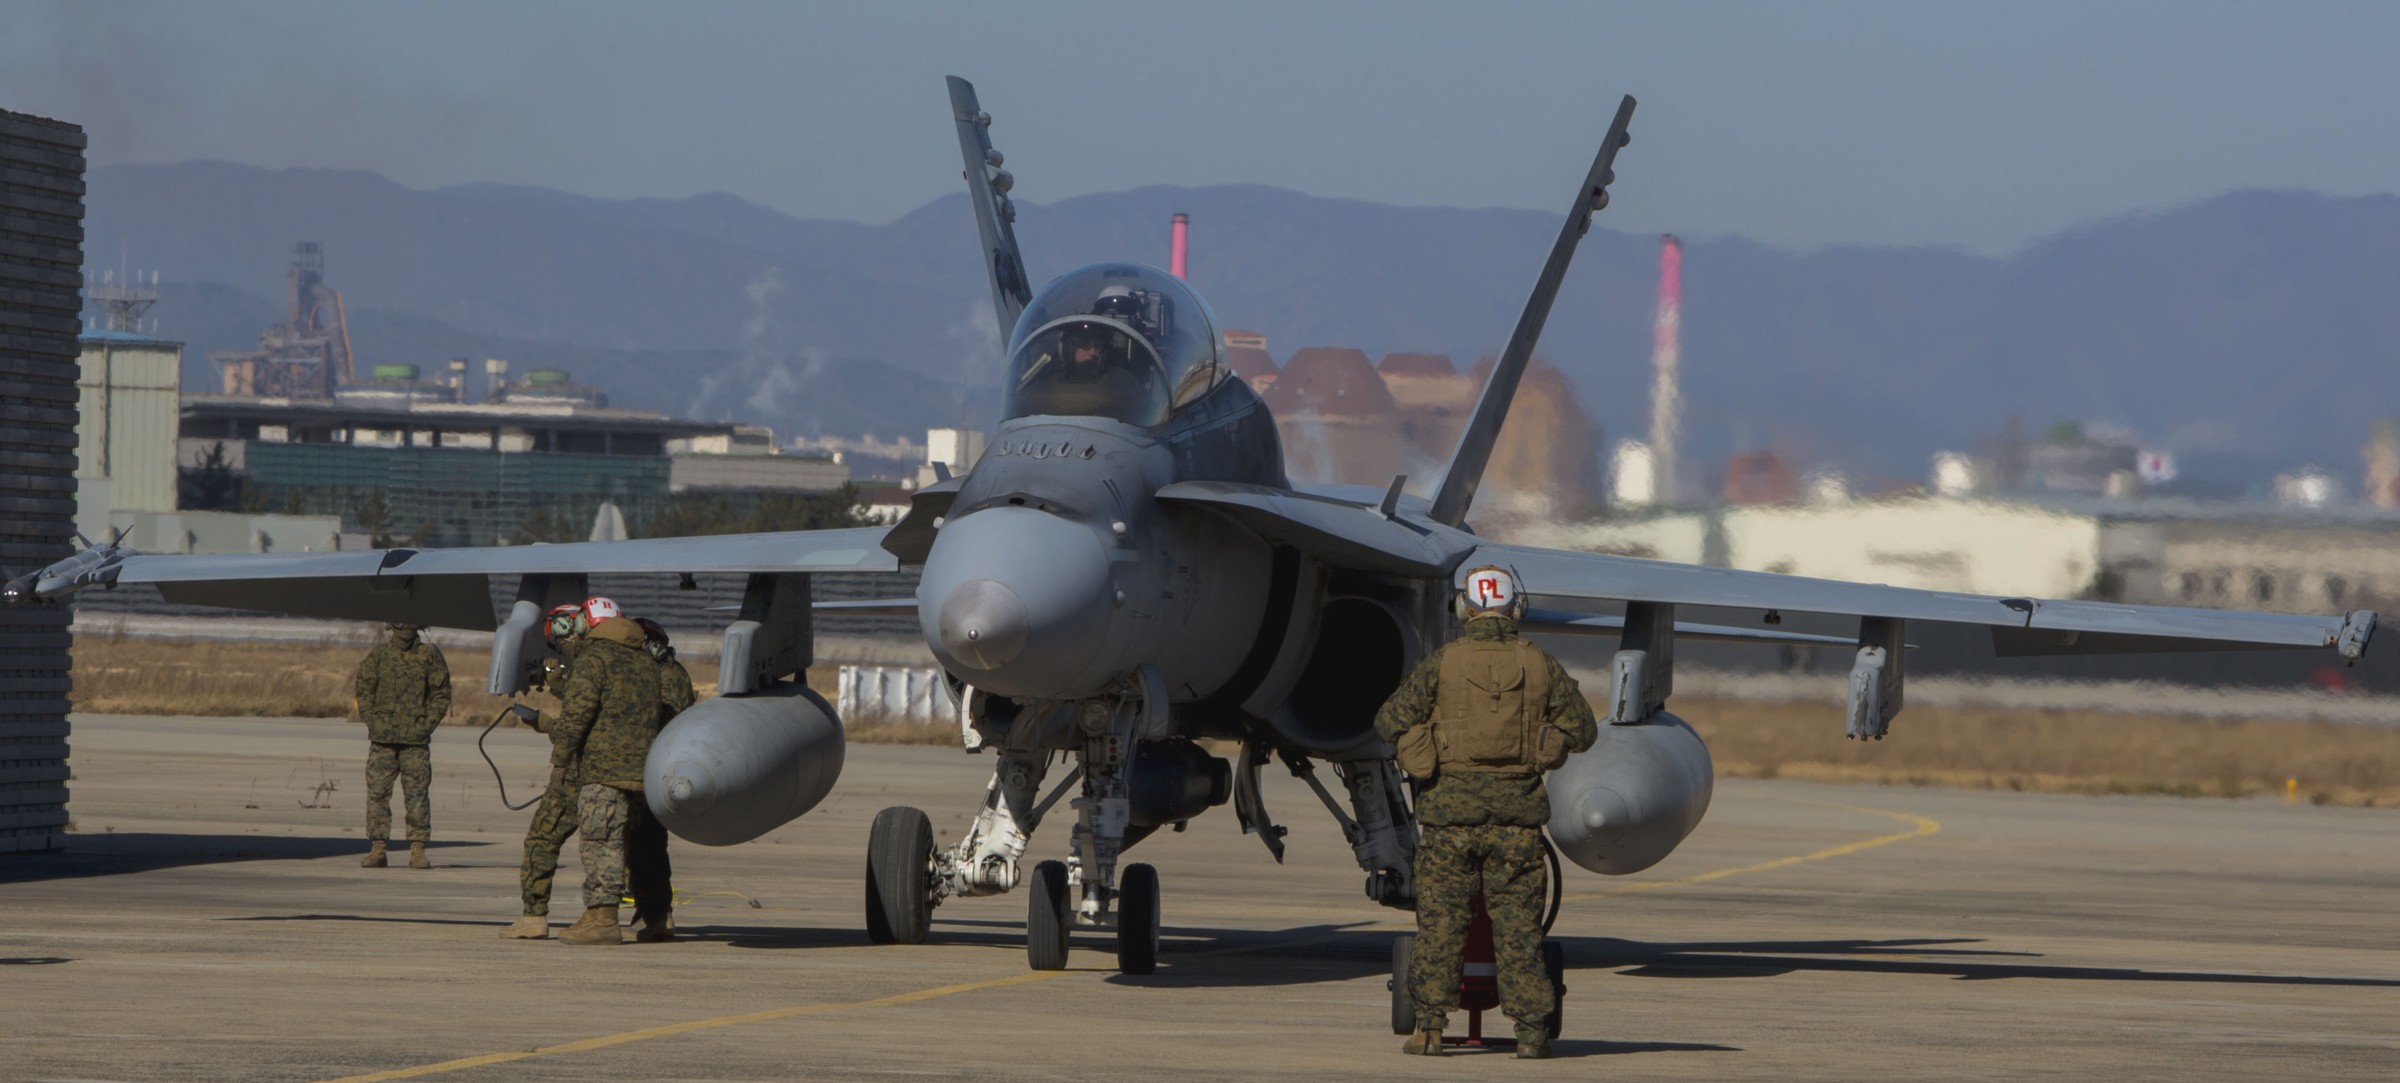 vmfa(aw)-242 bats marine all-weather fighter attack squadron usmc f/a-18d hornet 84